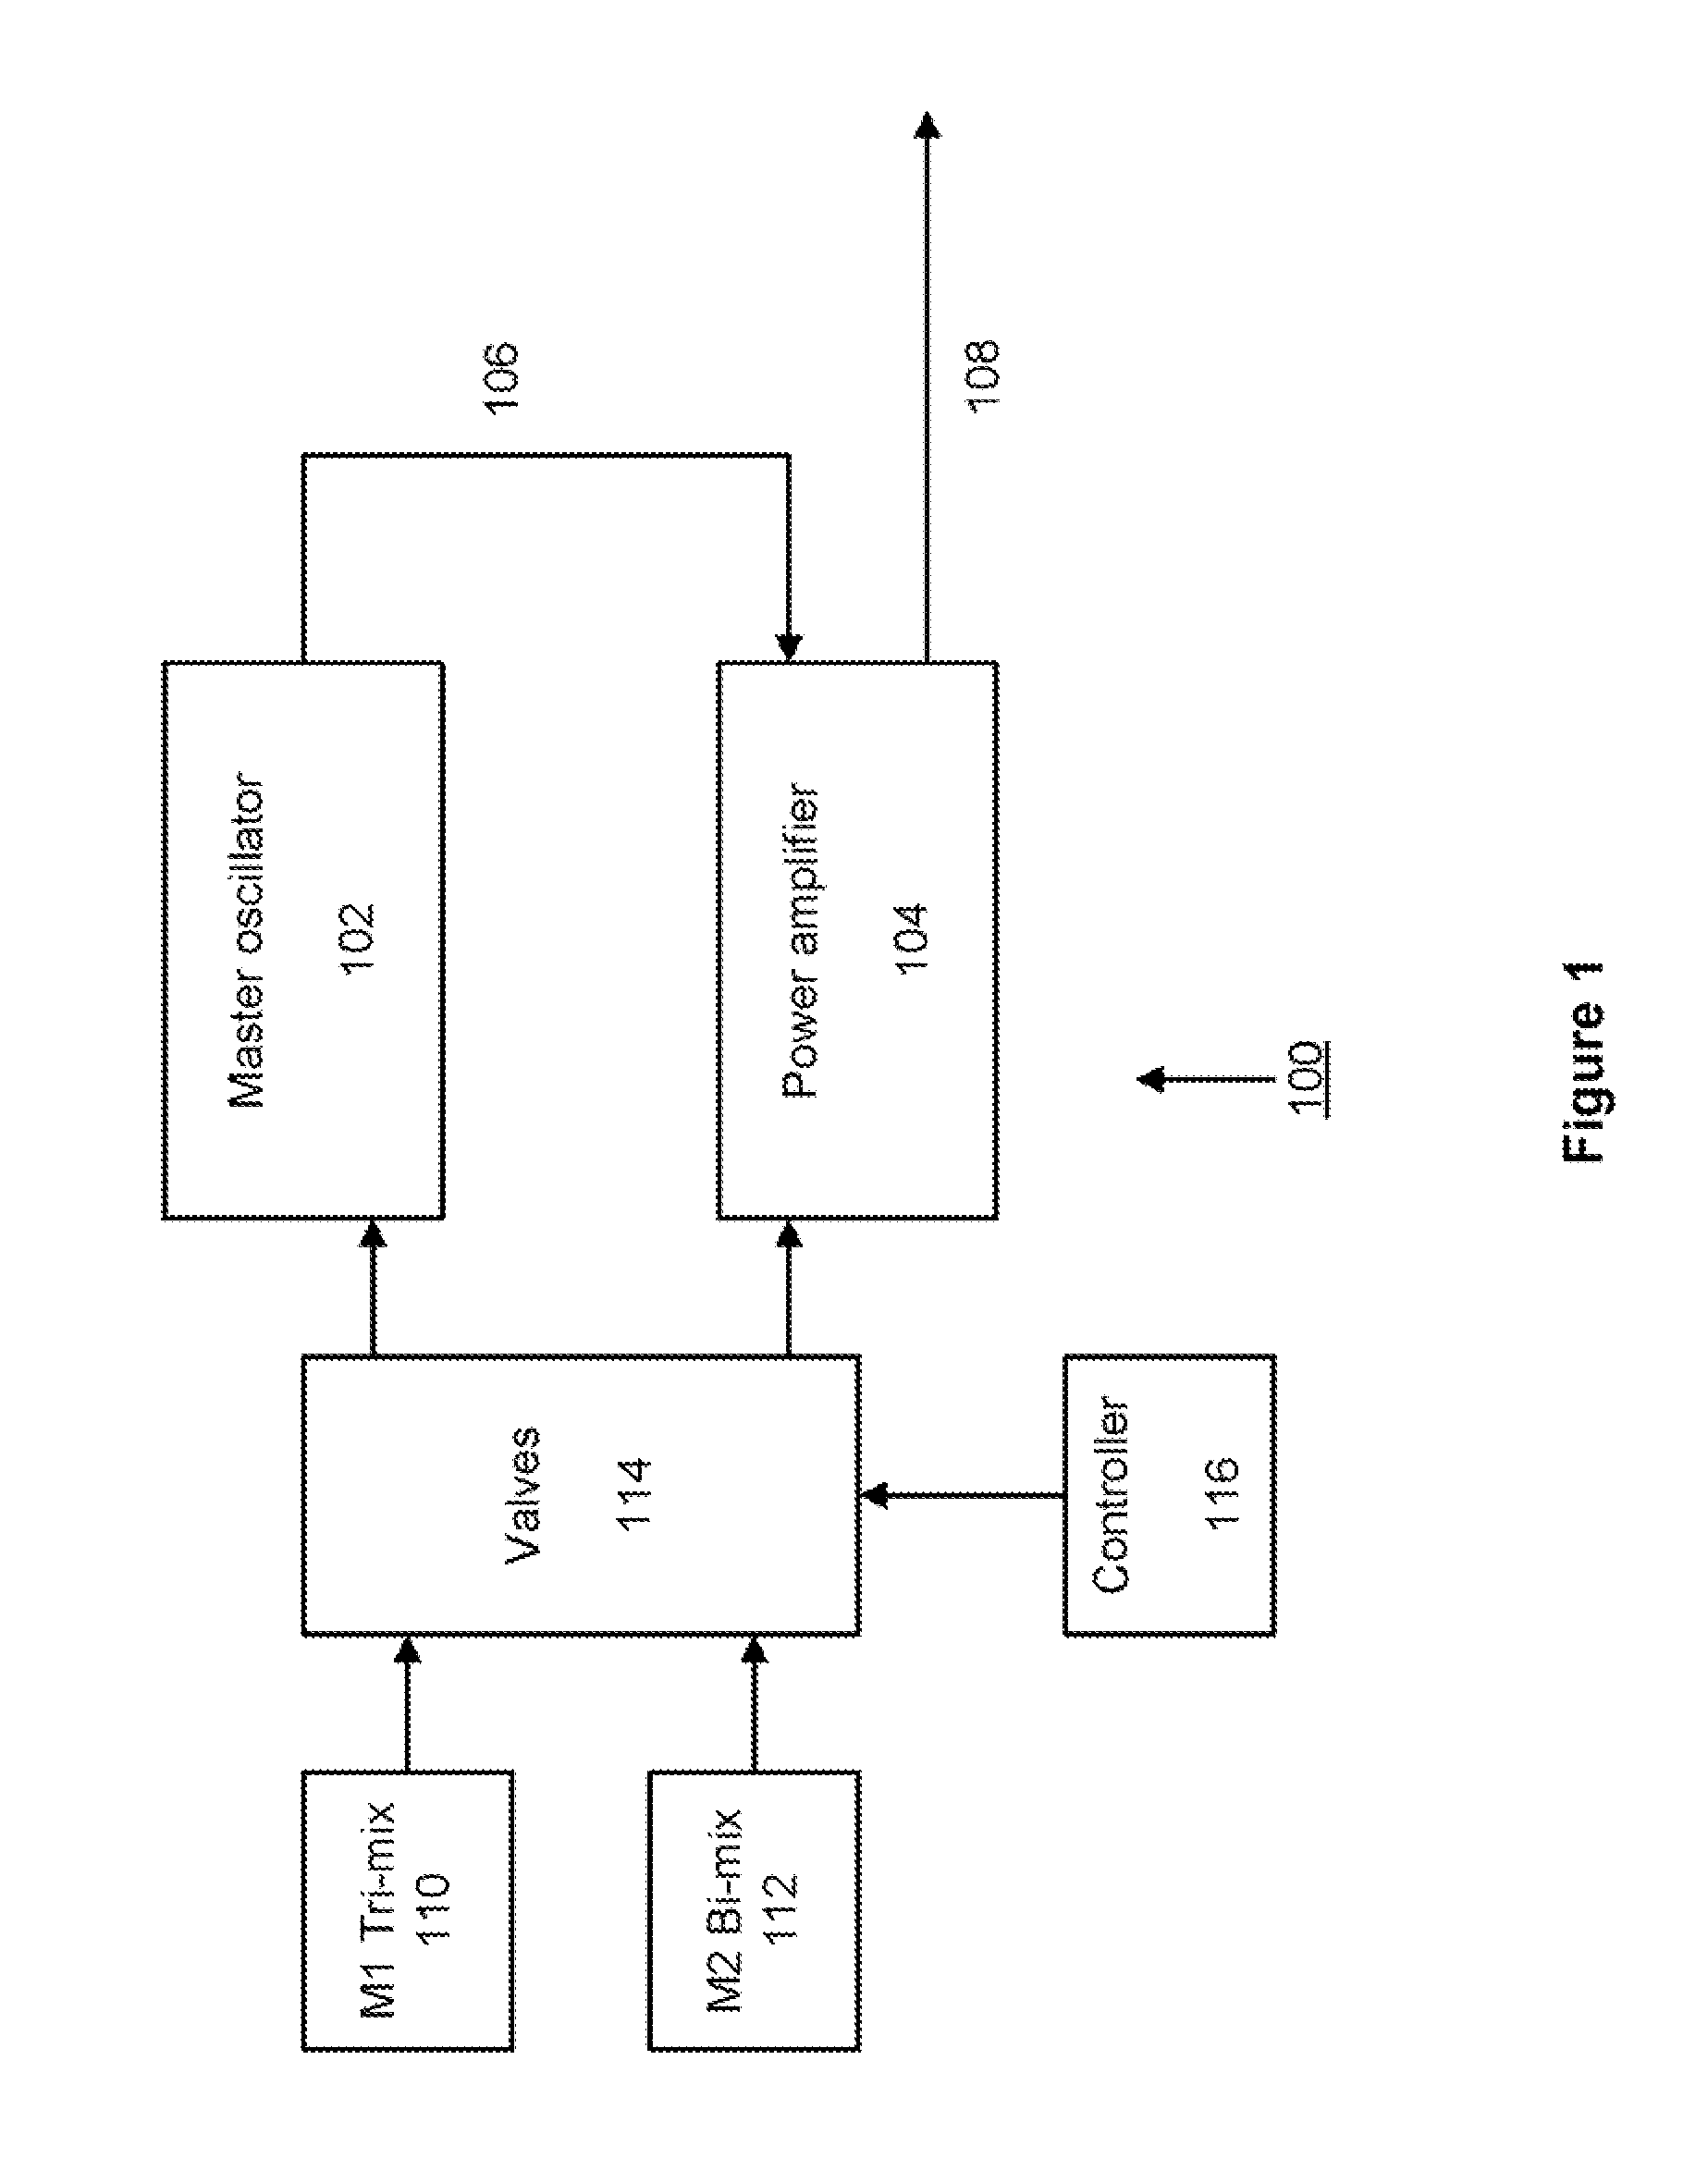 System and Method for High Accuracy Gas Refill in a Two Chamber Gas Discharge Laser System